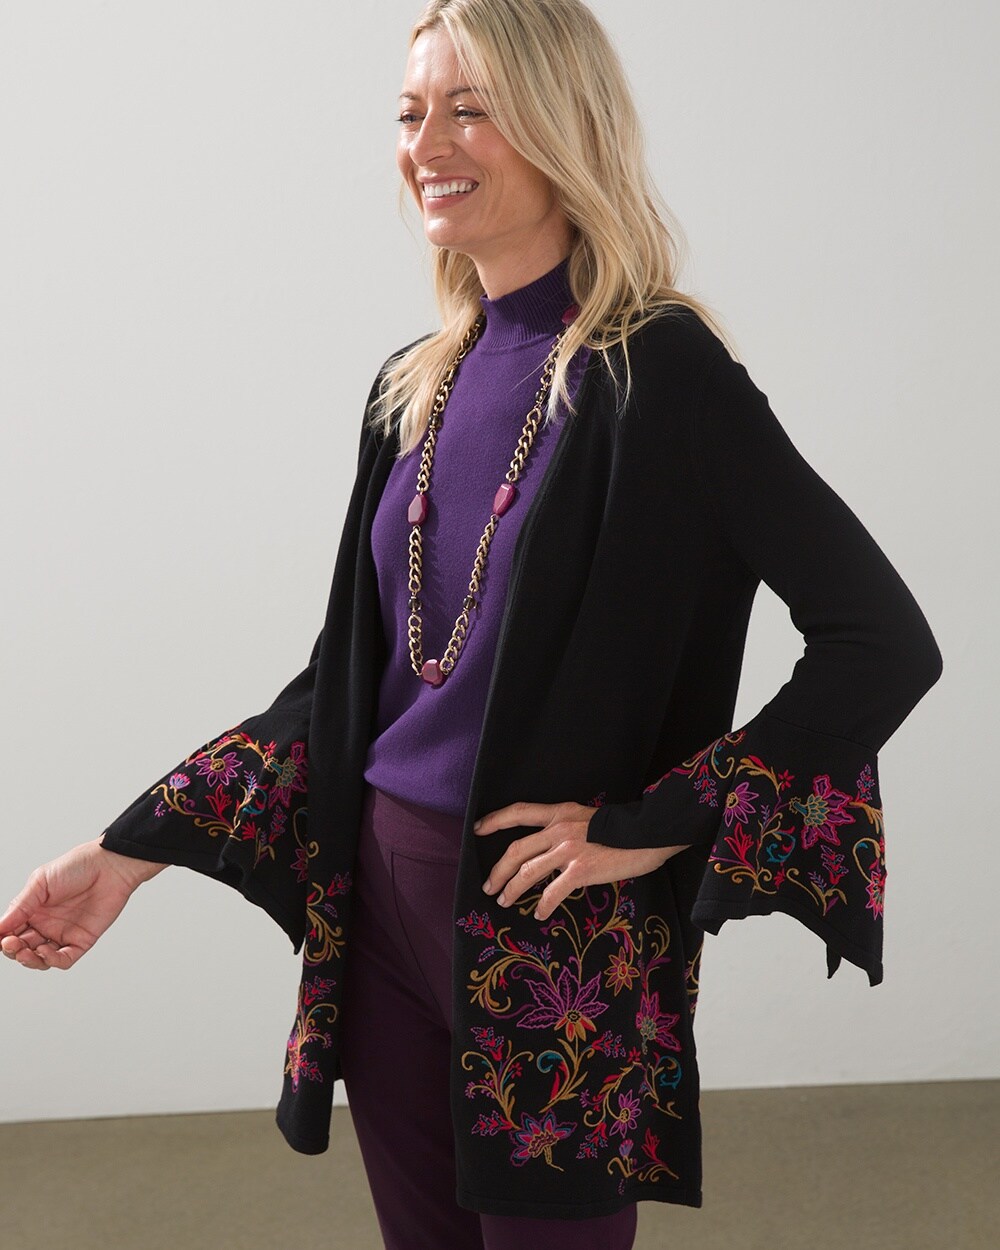 Floral Embroidered Cardigan video preview image, click to start video